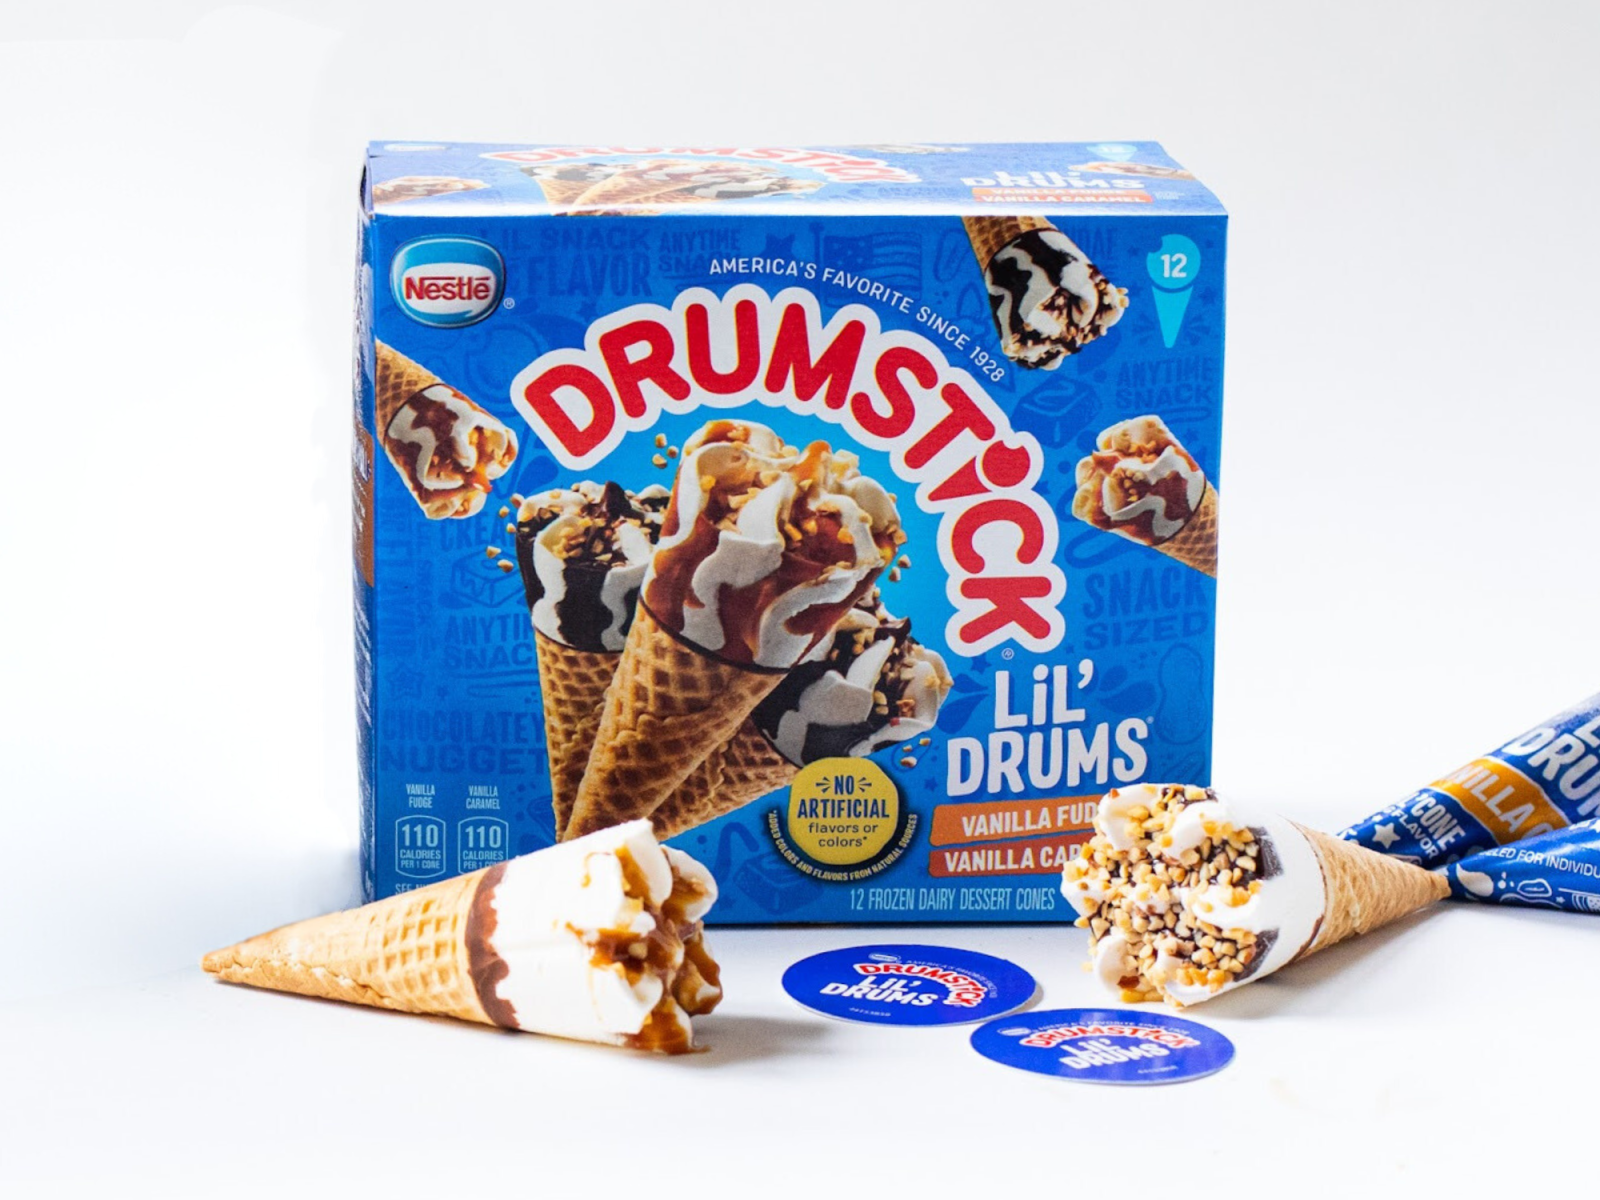 Pick Up Nestle Drumstick Cones 8-Count Boxes For Just $4.99 At Kroger